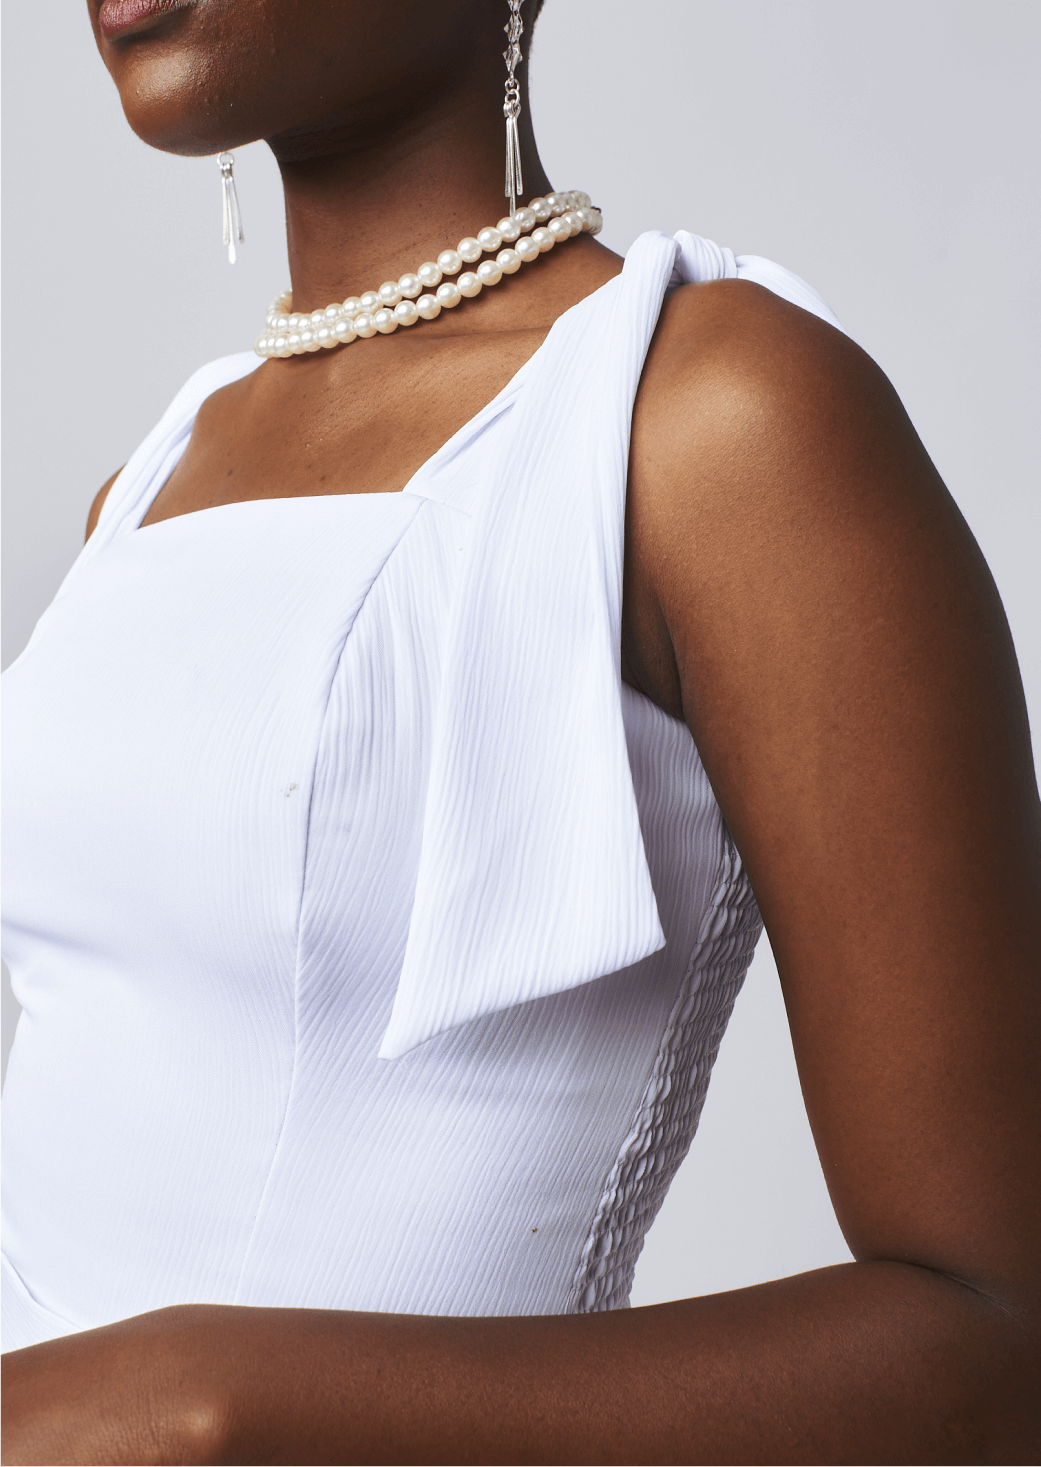 Shop Ribbed Tie Sleeveless Top by Cyami Custom Fit on Arrai. Discover stylish, affordable clothing, jewelry, handbags and unique handmade pieces from top Kenyan & African fashion brands prioritising sustainability and quality craftsmanship.